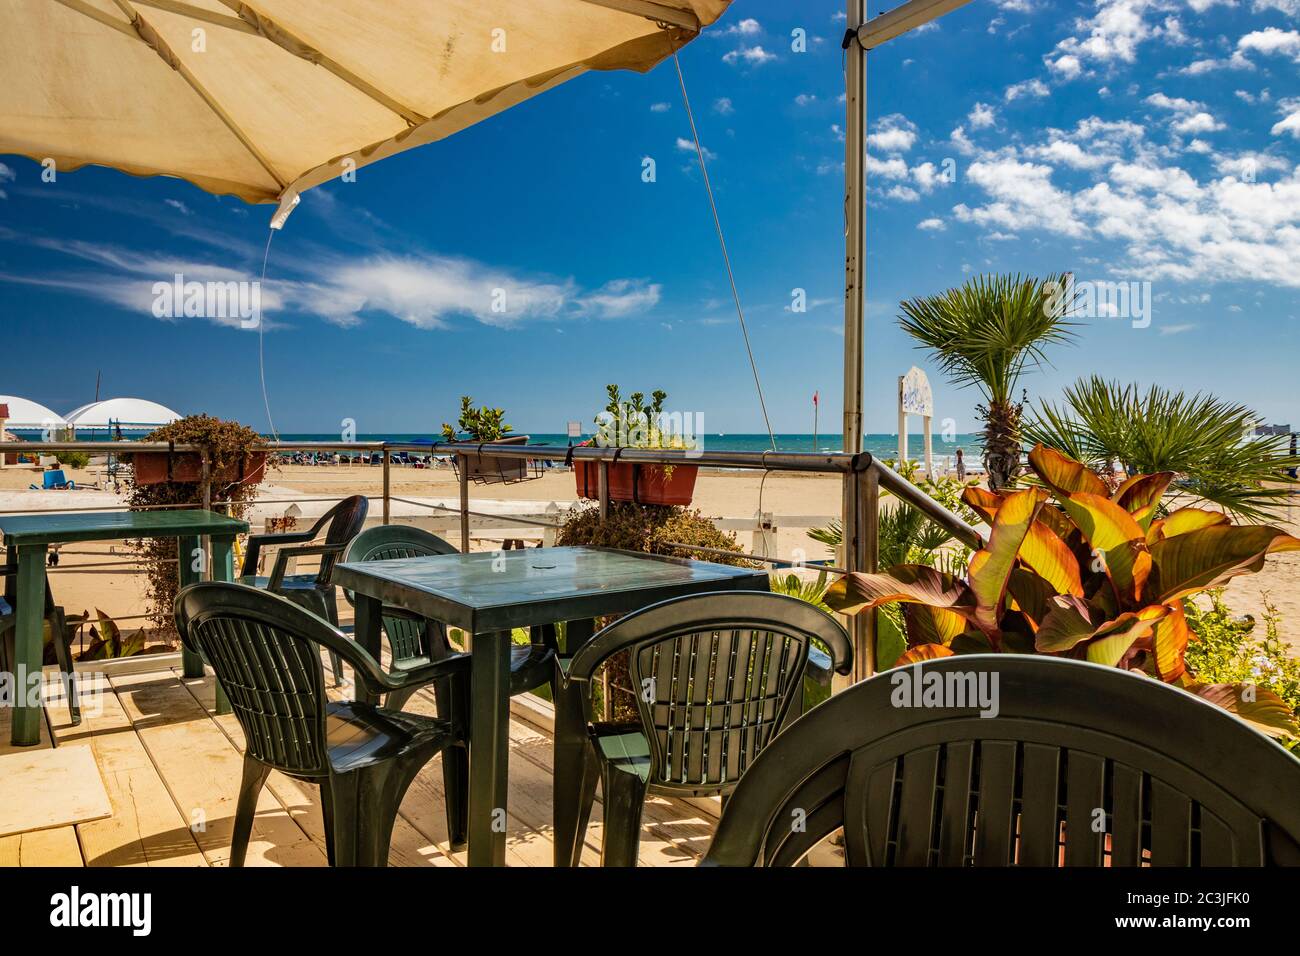 June 14, 2019 - Nettuno, Lazio, Rome, Italy - The empty tables of the bar of a bathhouse and the semi-deserted beach, on a windy day in late summer. T Stock Photo